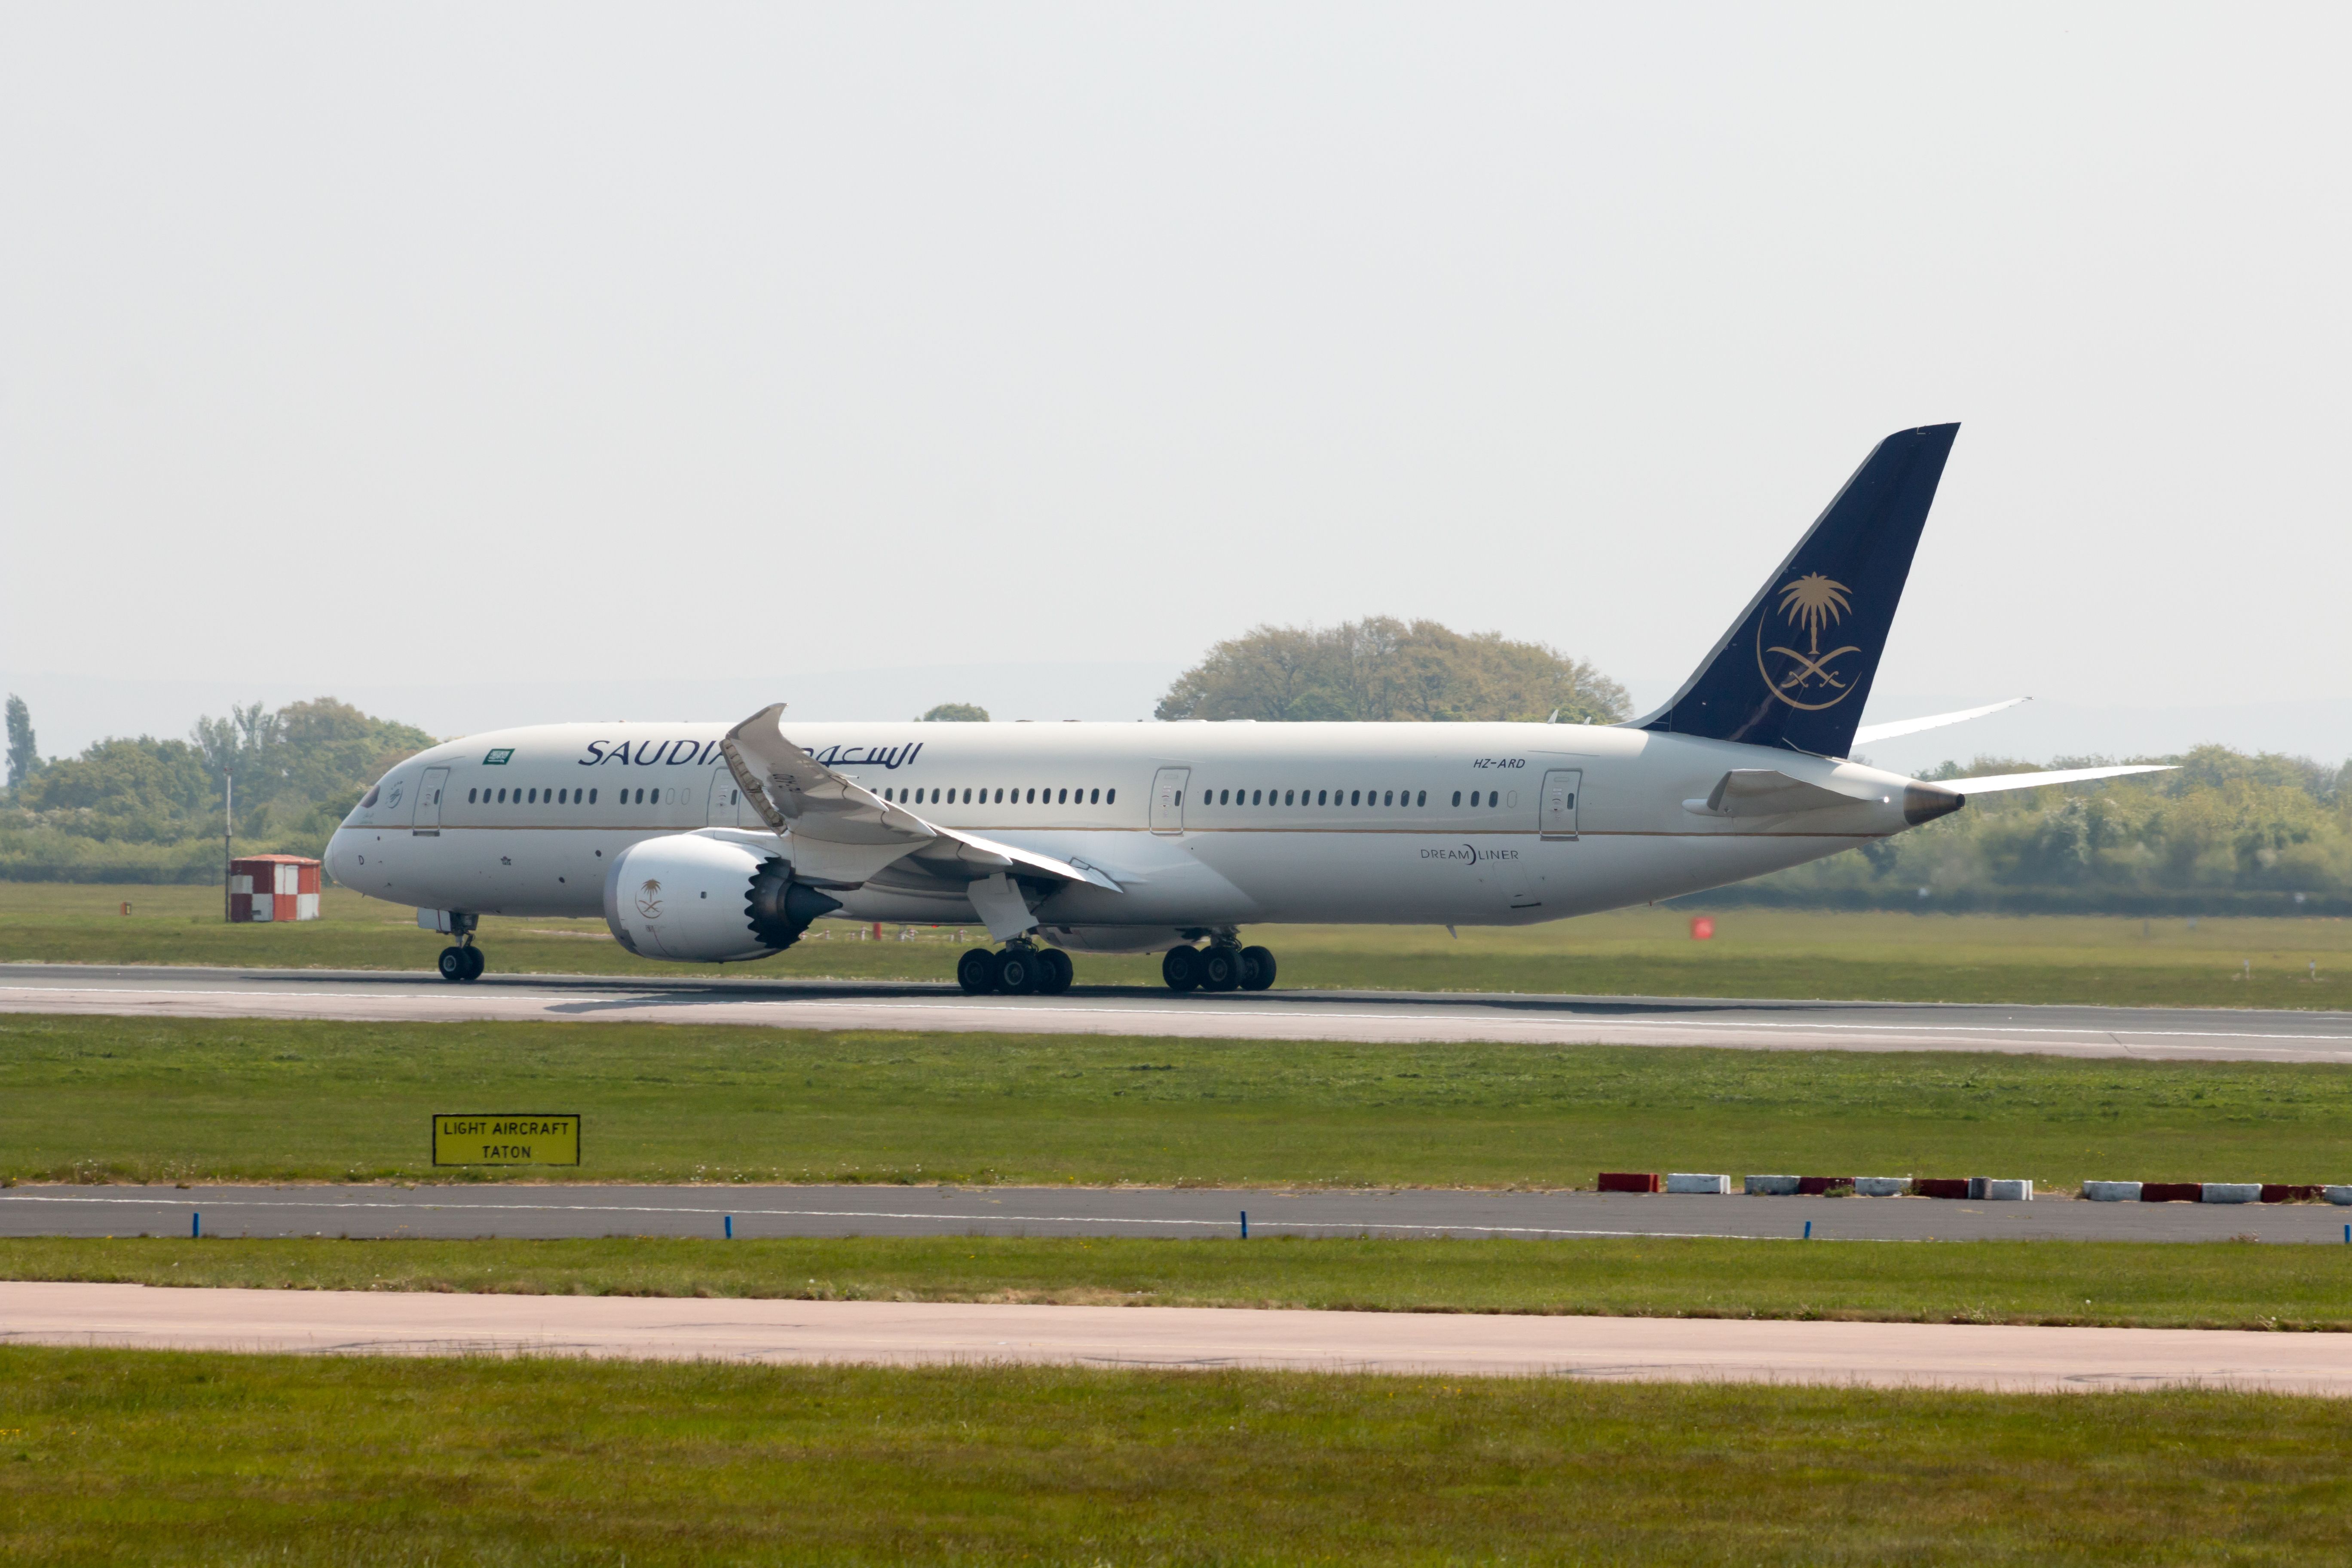 Saudia Boeing 787-9 Dreamliner taking off from Manchester International Airport.